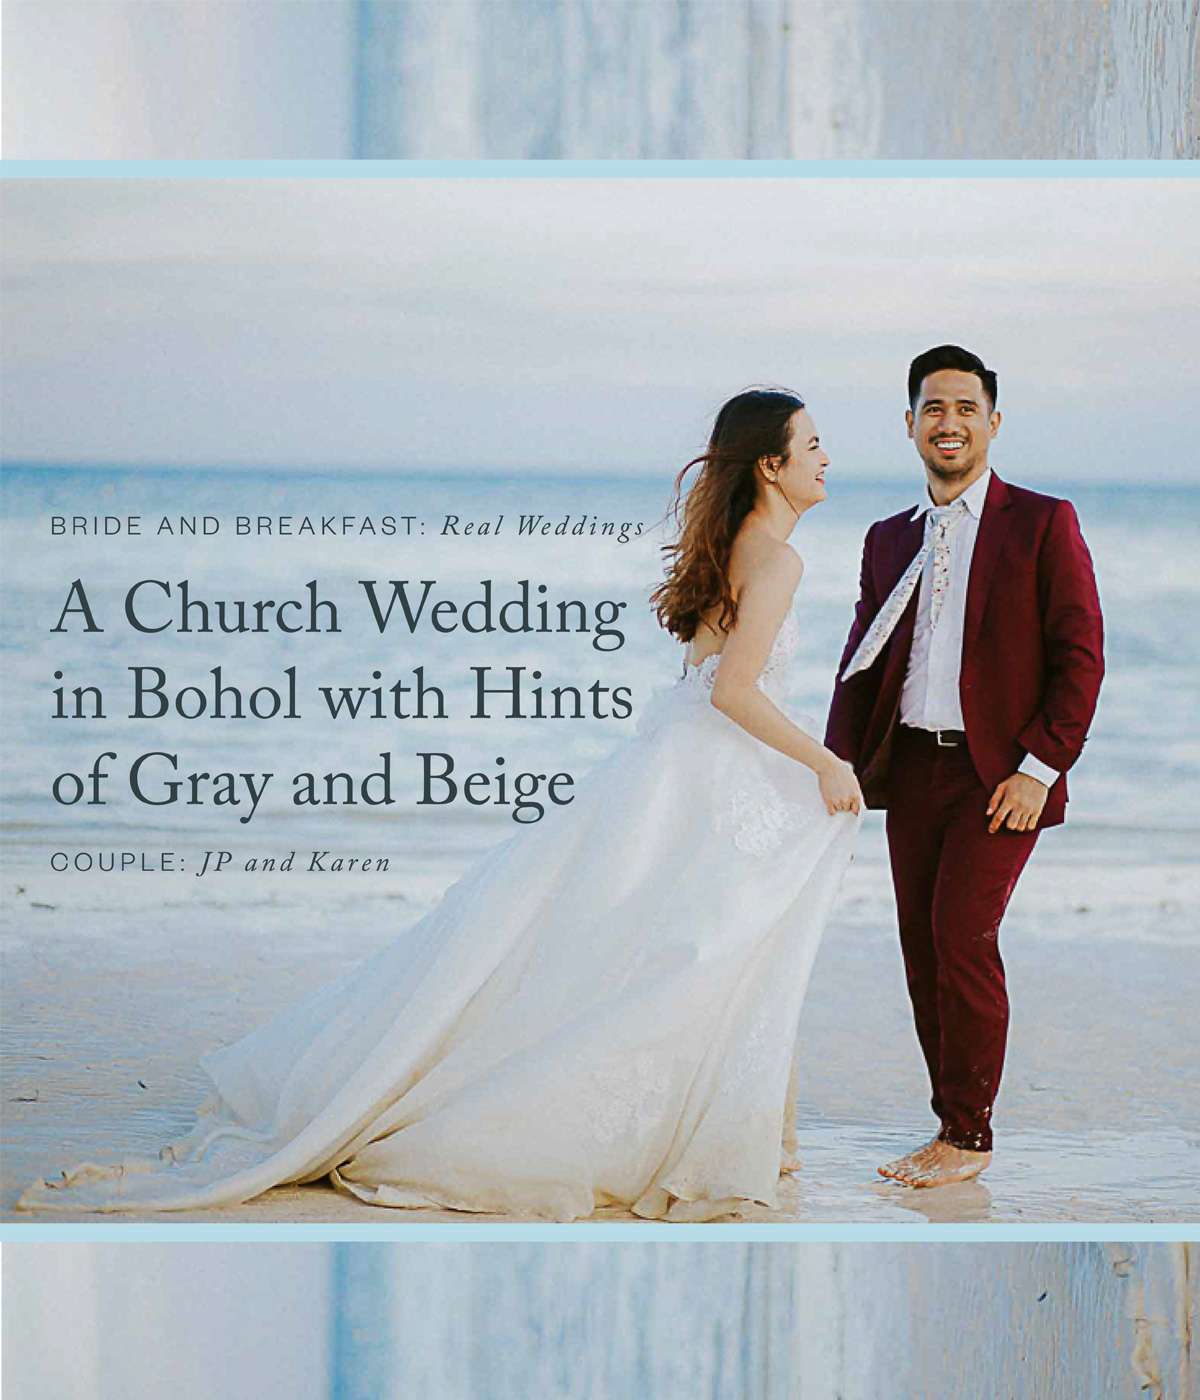 A Church Wedding in Bohol with Hints of Gray and Beige